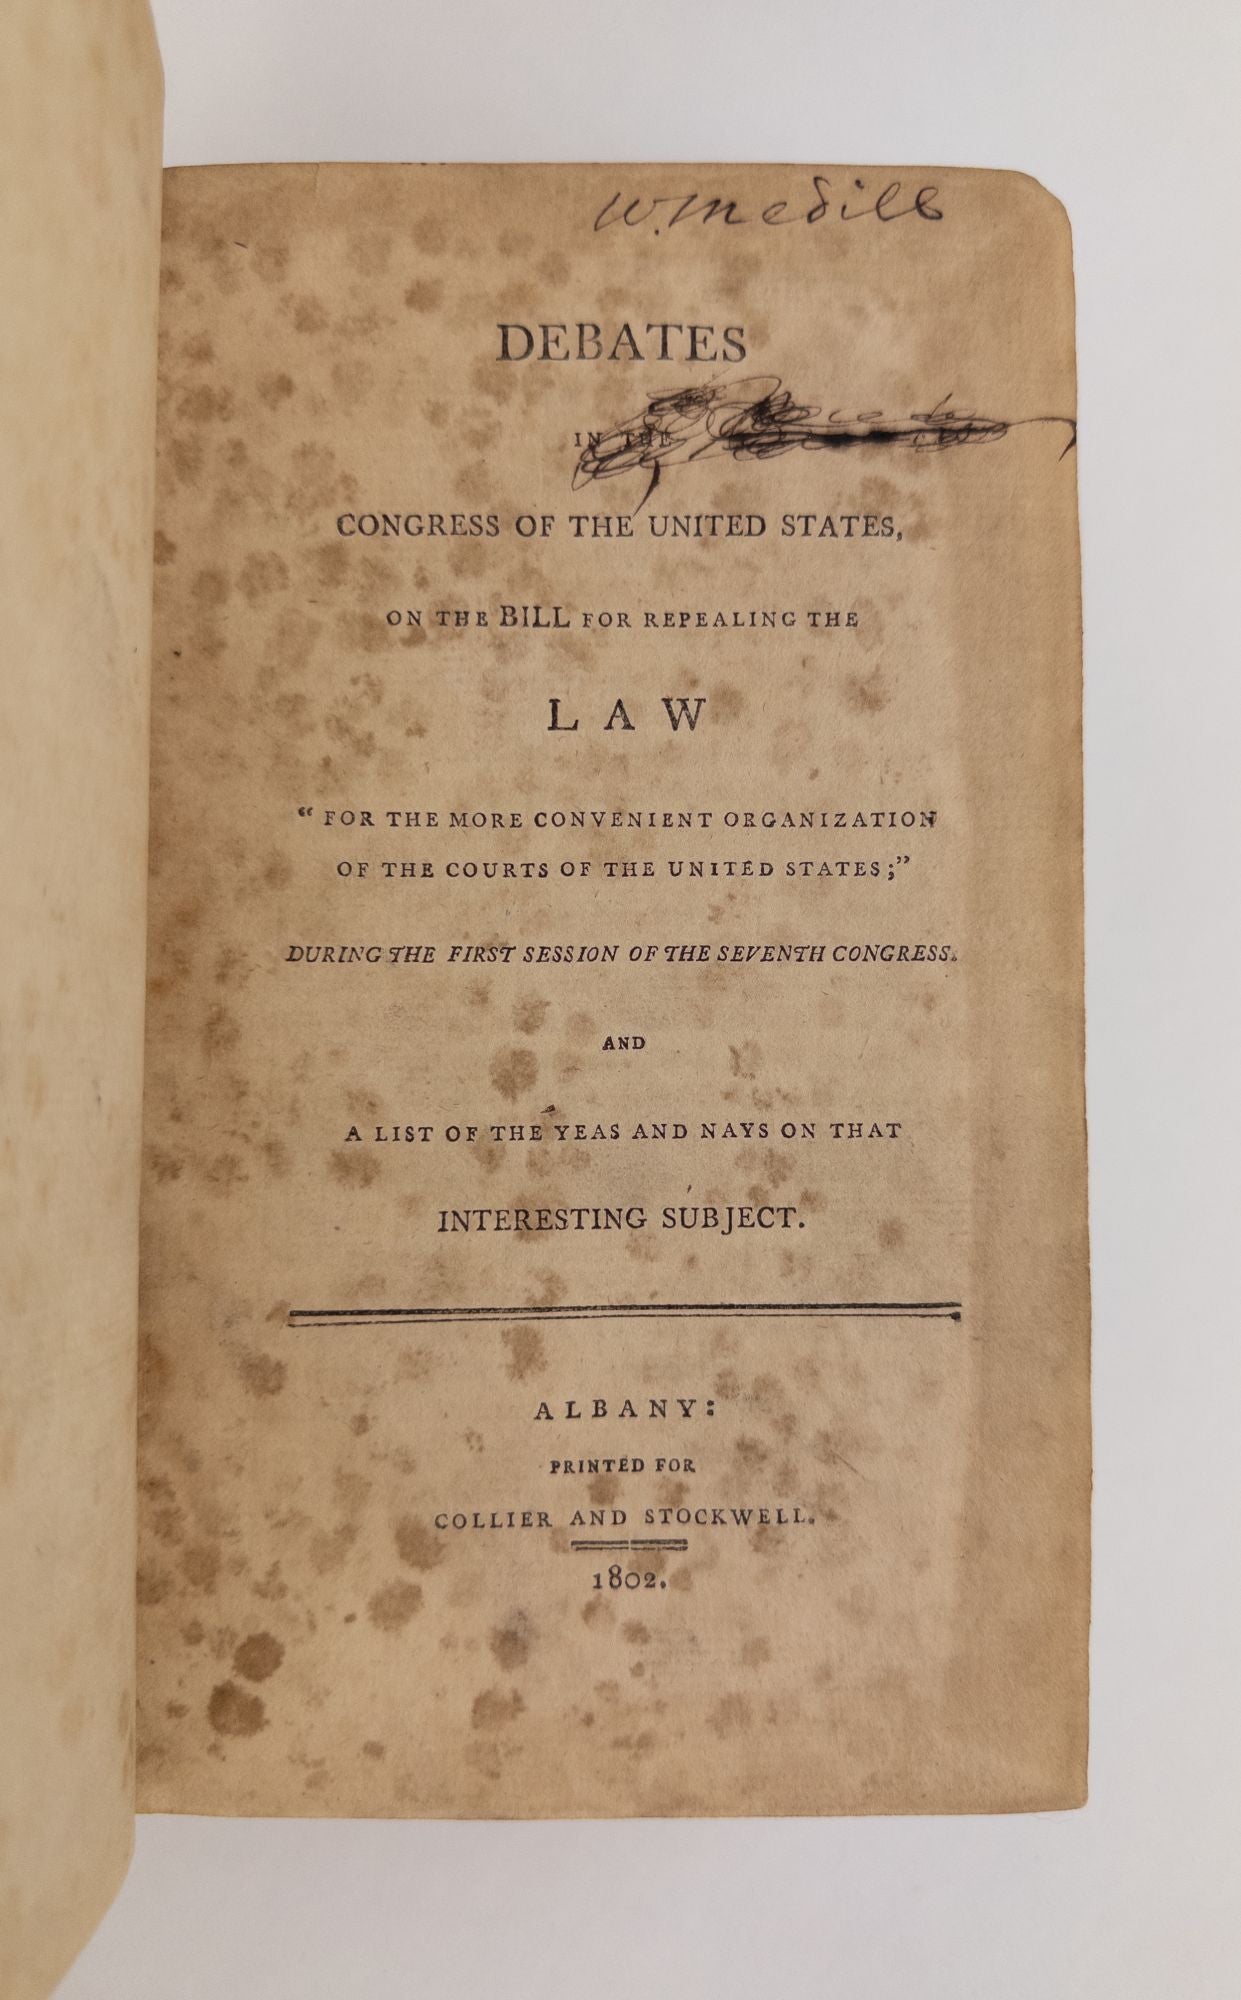 Product Image for Debates in the Congress of the United States on the Bill for Repealing the Law "For the More Convenient Organization of the Courts of the United States;" During the First Session of the Seventh Congress